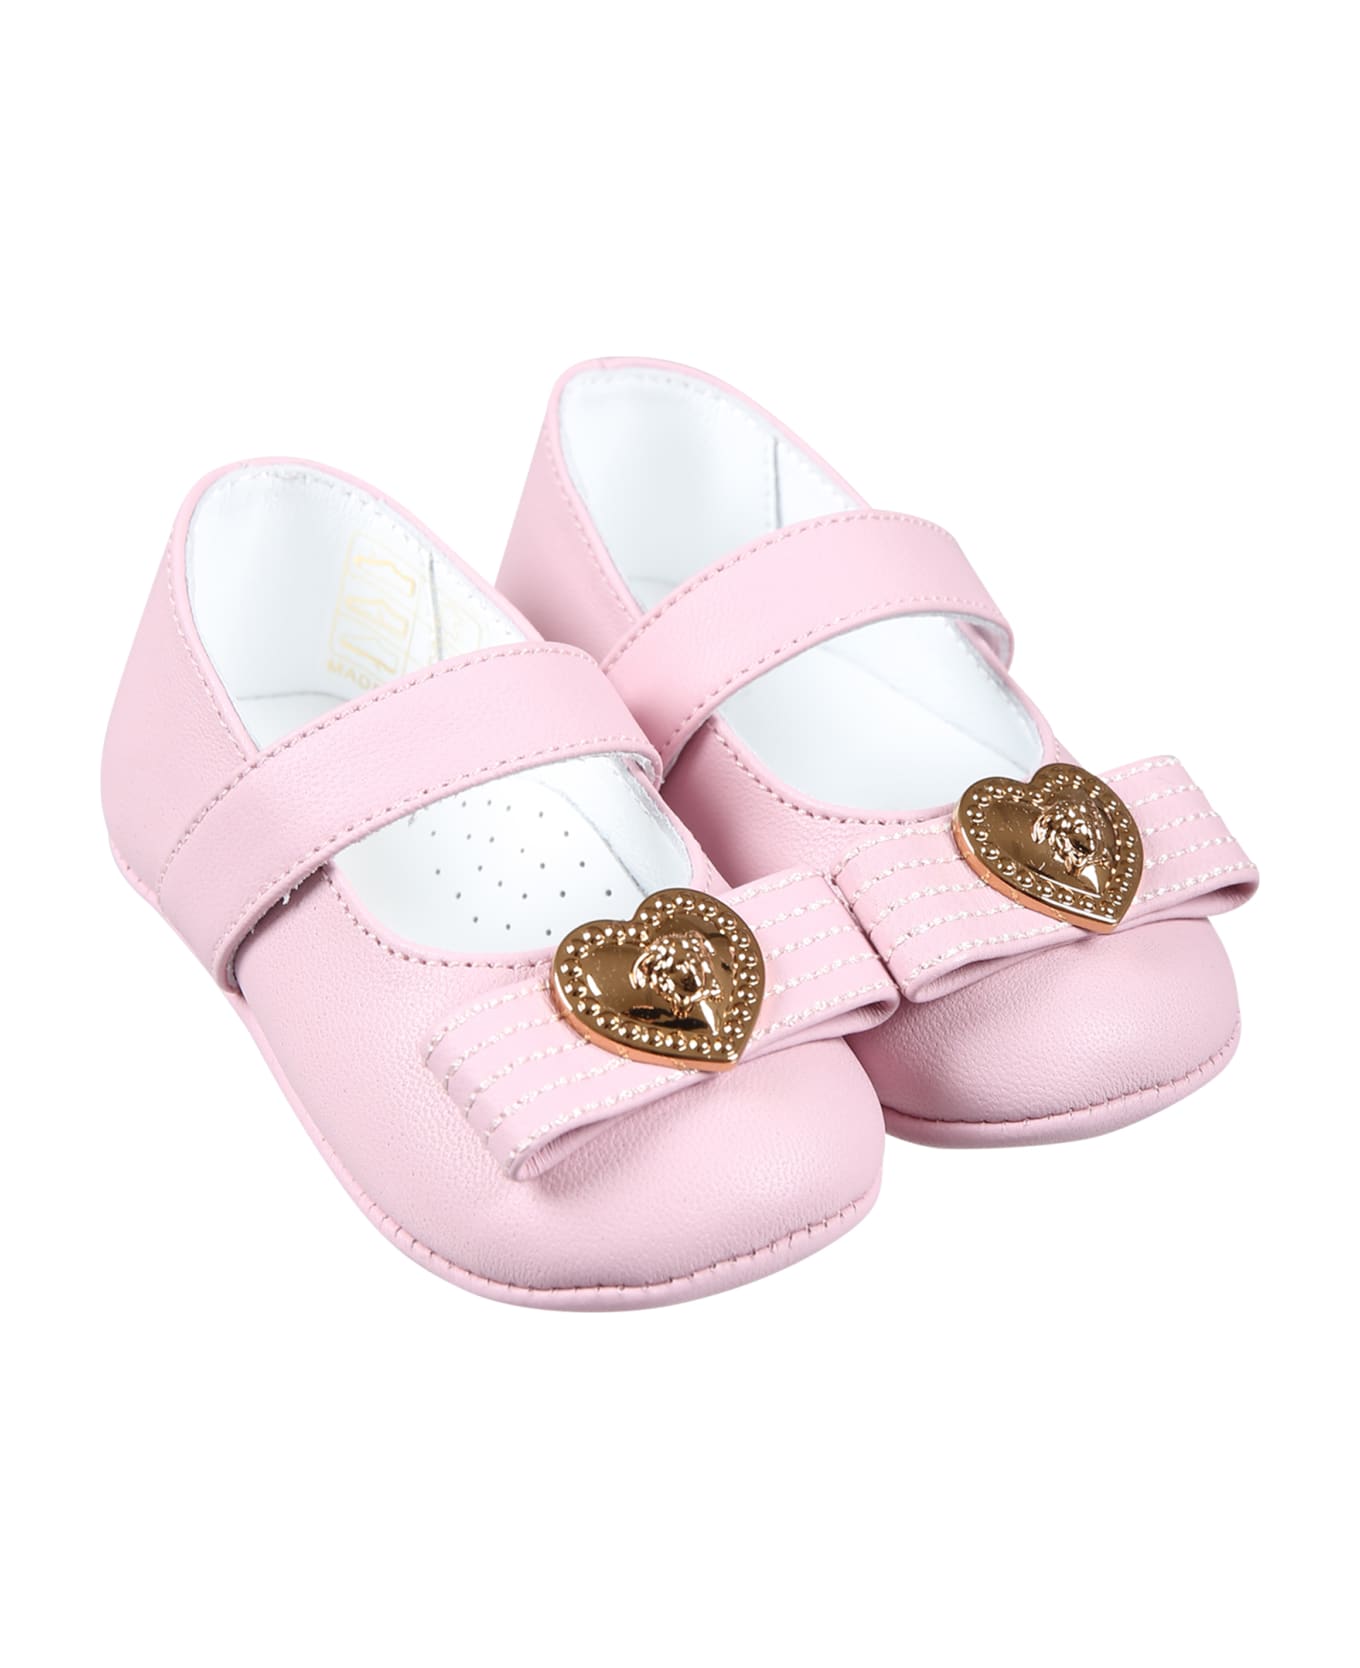 Versace Pink Ballet Flats For Baby Girl With Heart And Medusa - Pink